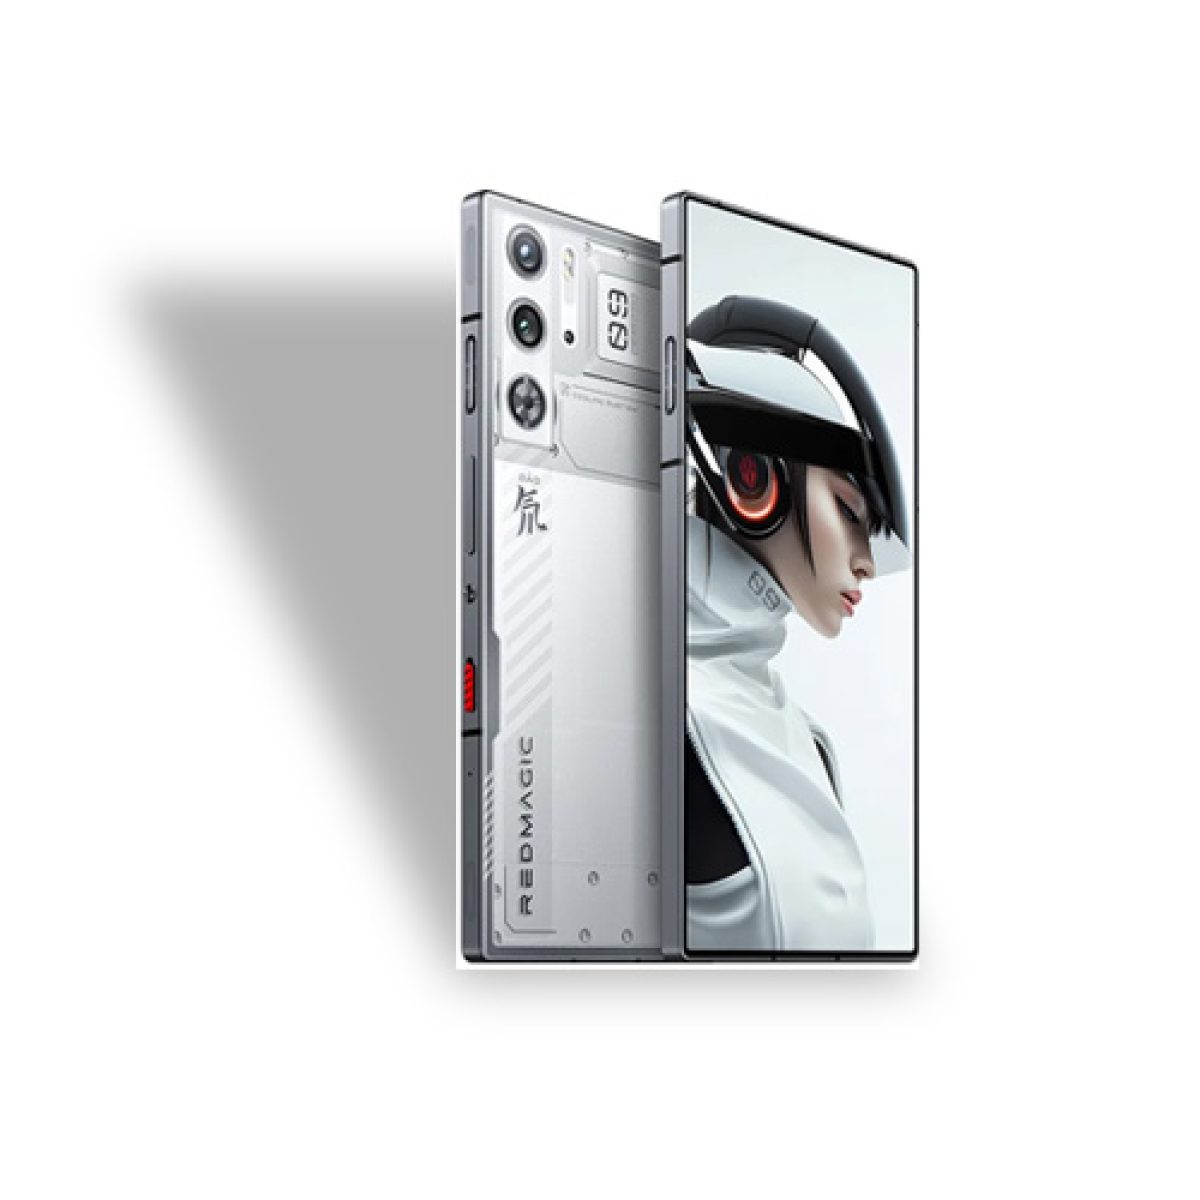 REDMAGIC 9 Pro Gaming Smartphone - Product Page - REDMAGIC (US and